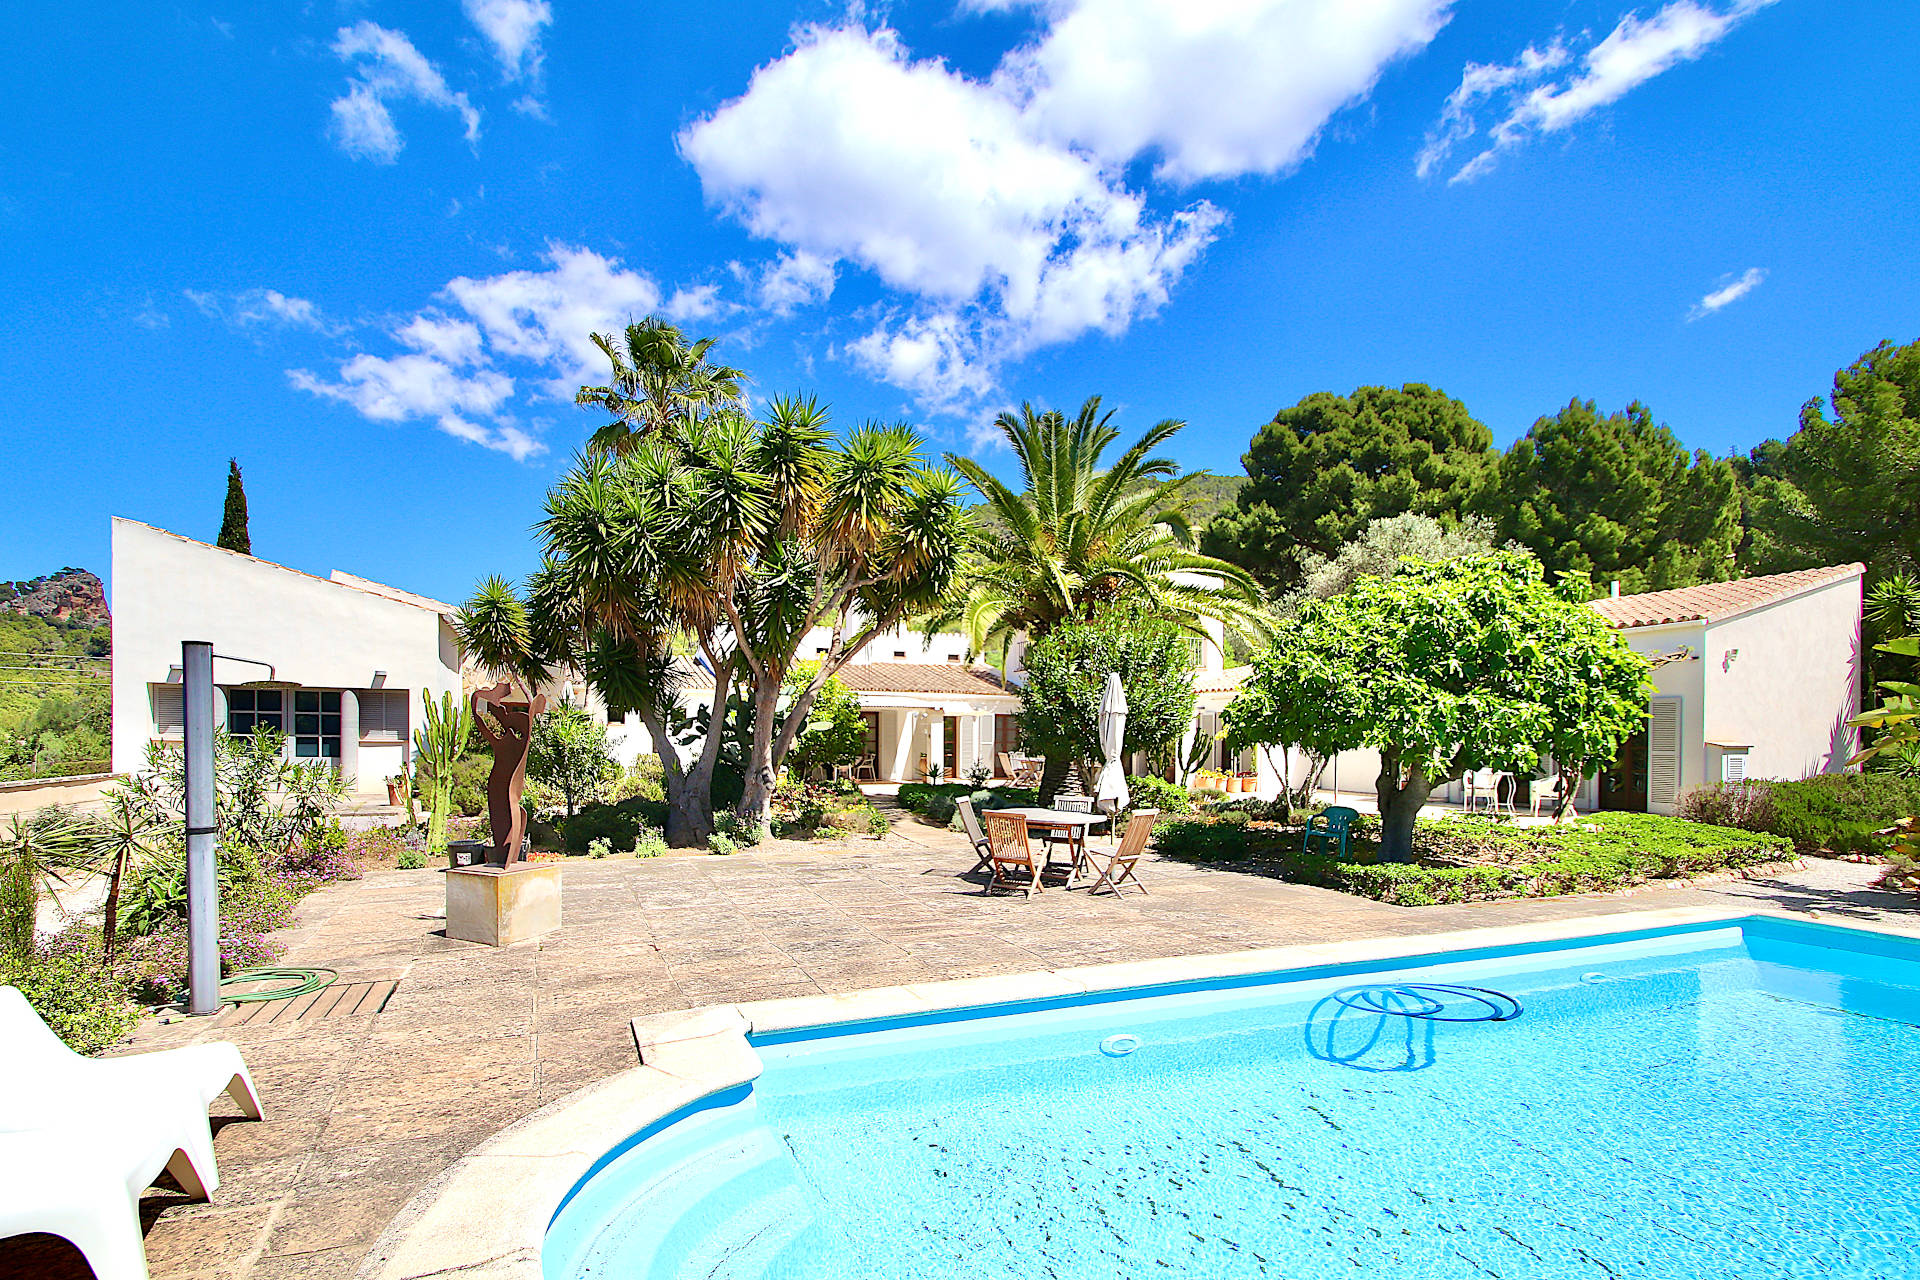 Idyllic finca in prime location with 3 bedrooms, pool and beautiful garden for sale